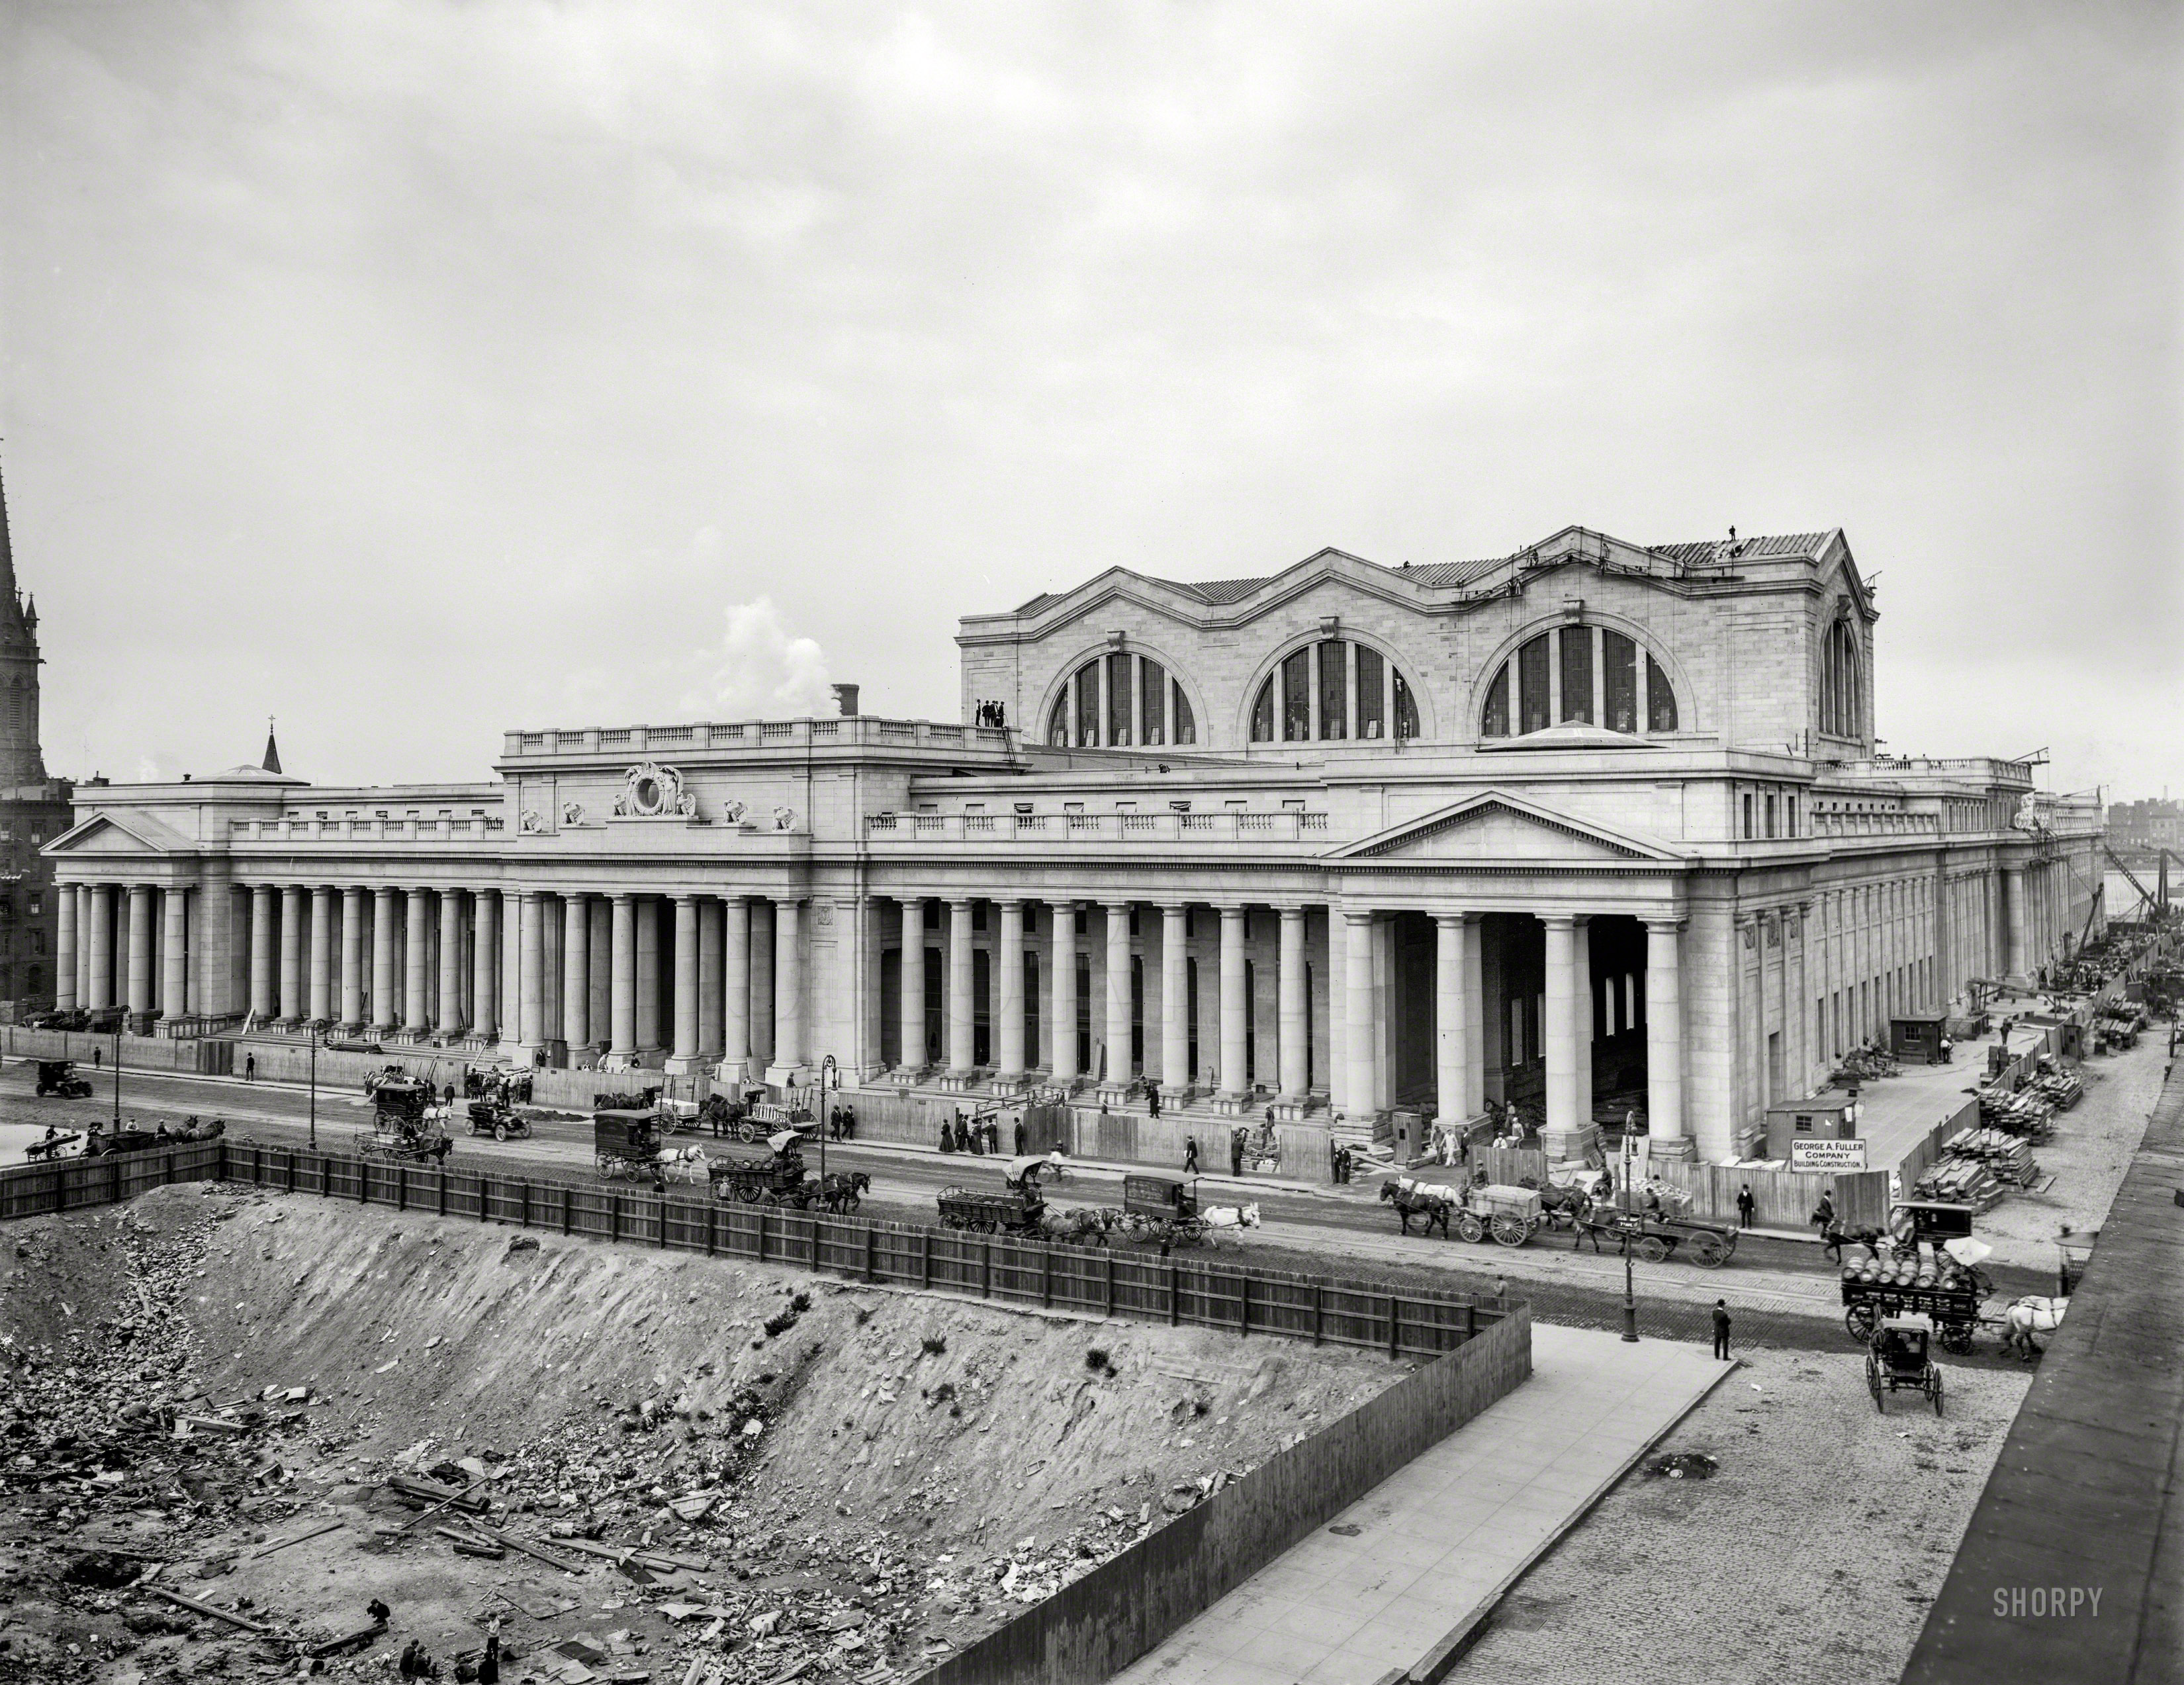 Manhattan circa 1909. "New Pennsylvania Station, New York, N.Y." The Beaux-Arts behemoth whose demolition in 1963 lit a fire under the nation's armchair architects. 8x10 inch dry plate glass negative. View full size.